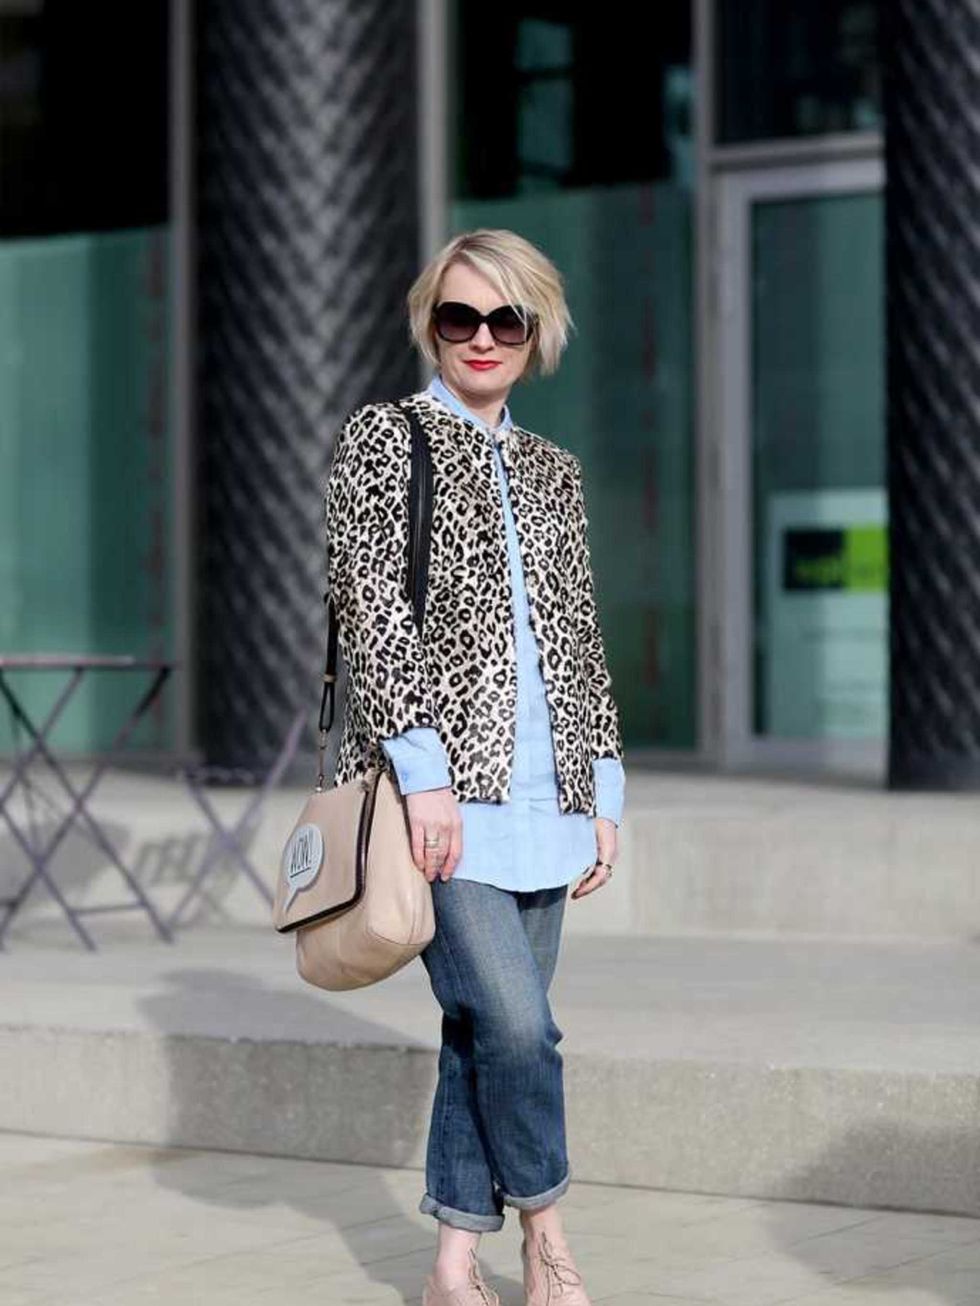 <p>Lorraine Candy - Editor-in-Chief</p>

<p>Maje coat, Marks & Spencer shirt, Current/Elliott at Donna Ida jeans, Tom Ford sunglasses, Anya Hindmarch bag, Marks & Spencer shoes</p>